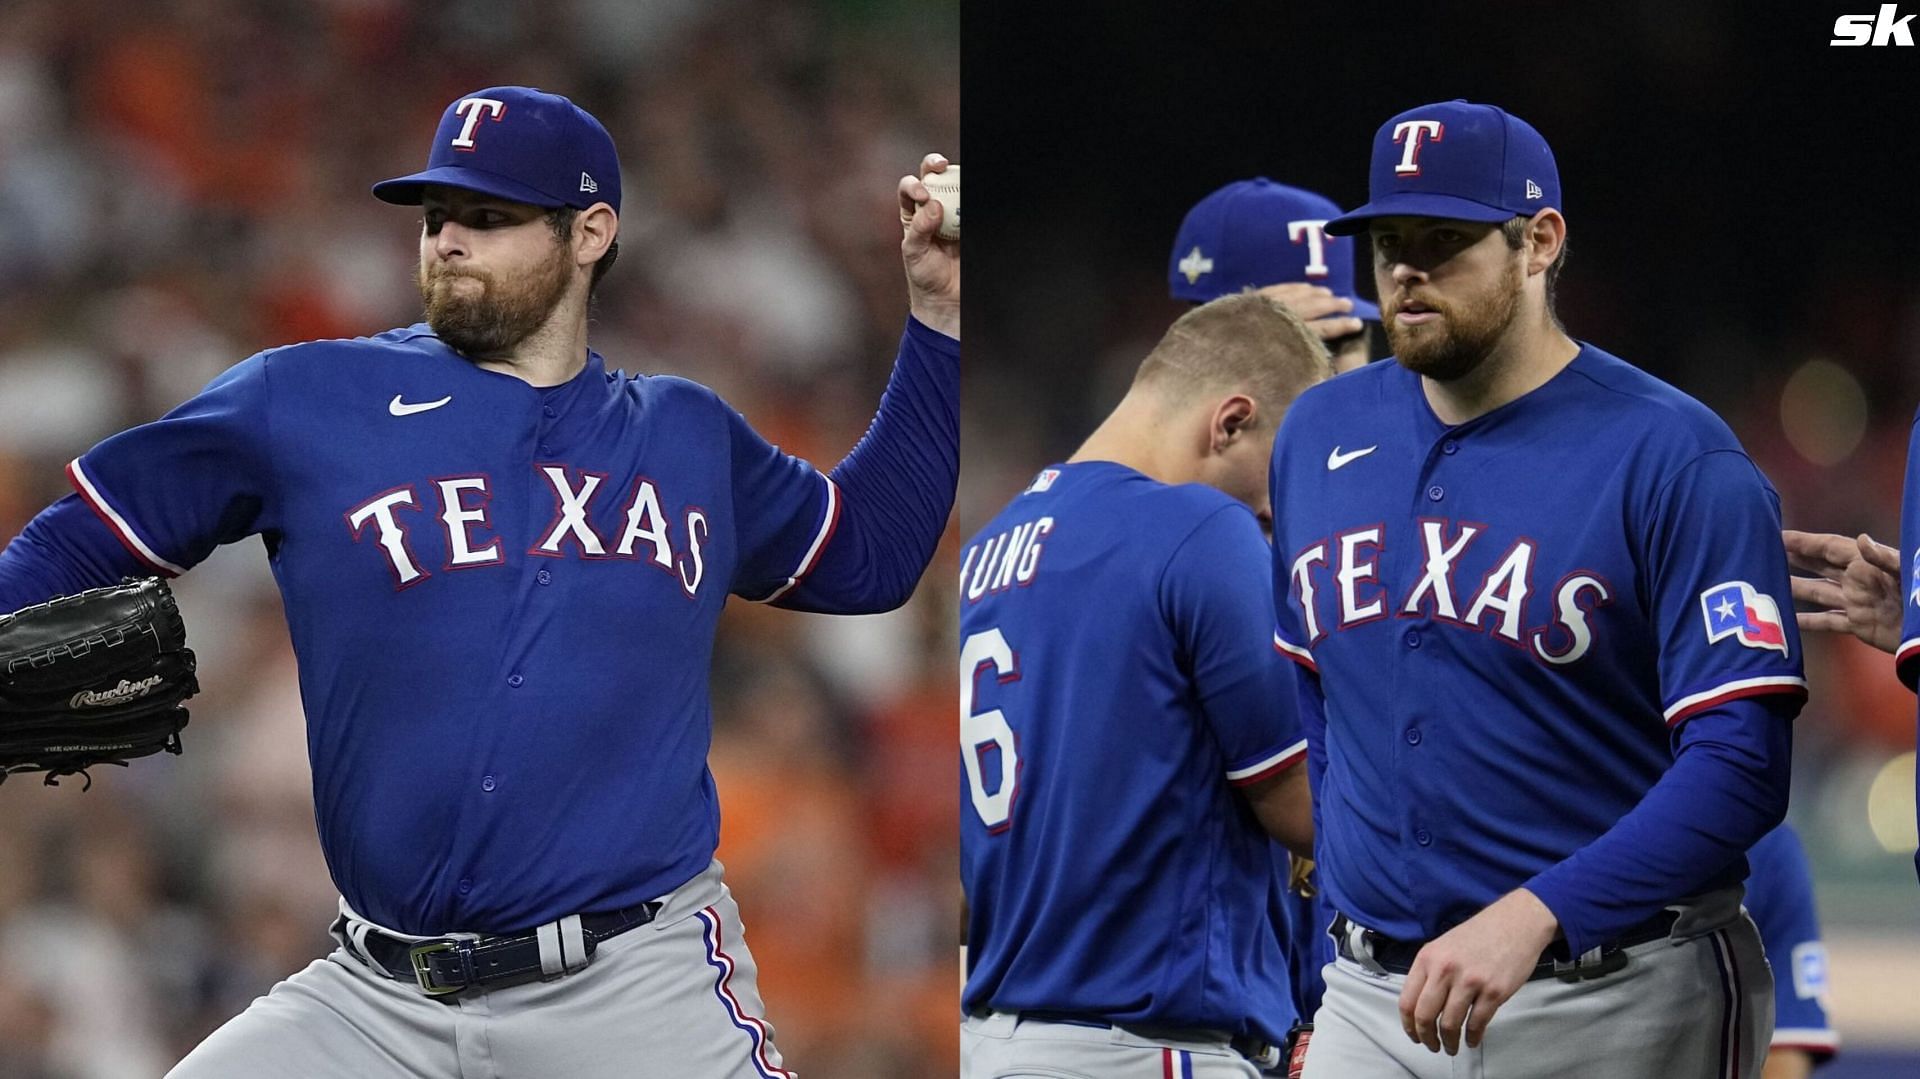 Texas Rangers have 5 All-Star starters after García added along with  Baltimore's Hays - NBC Sports